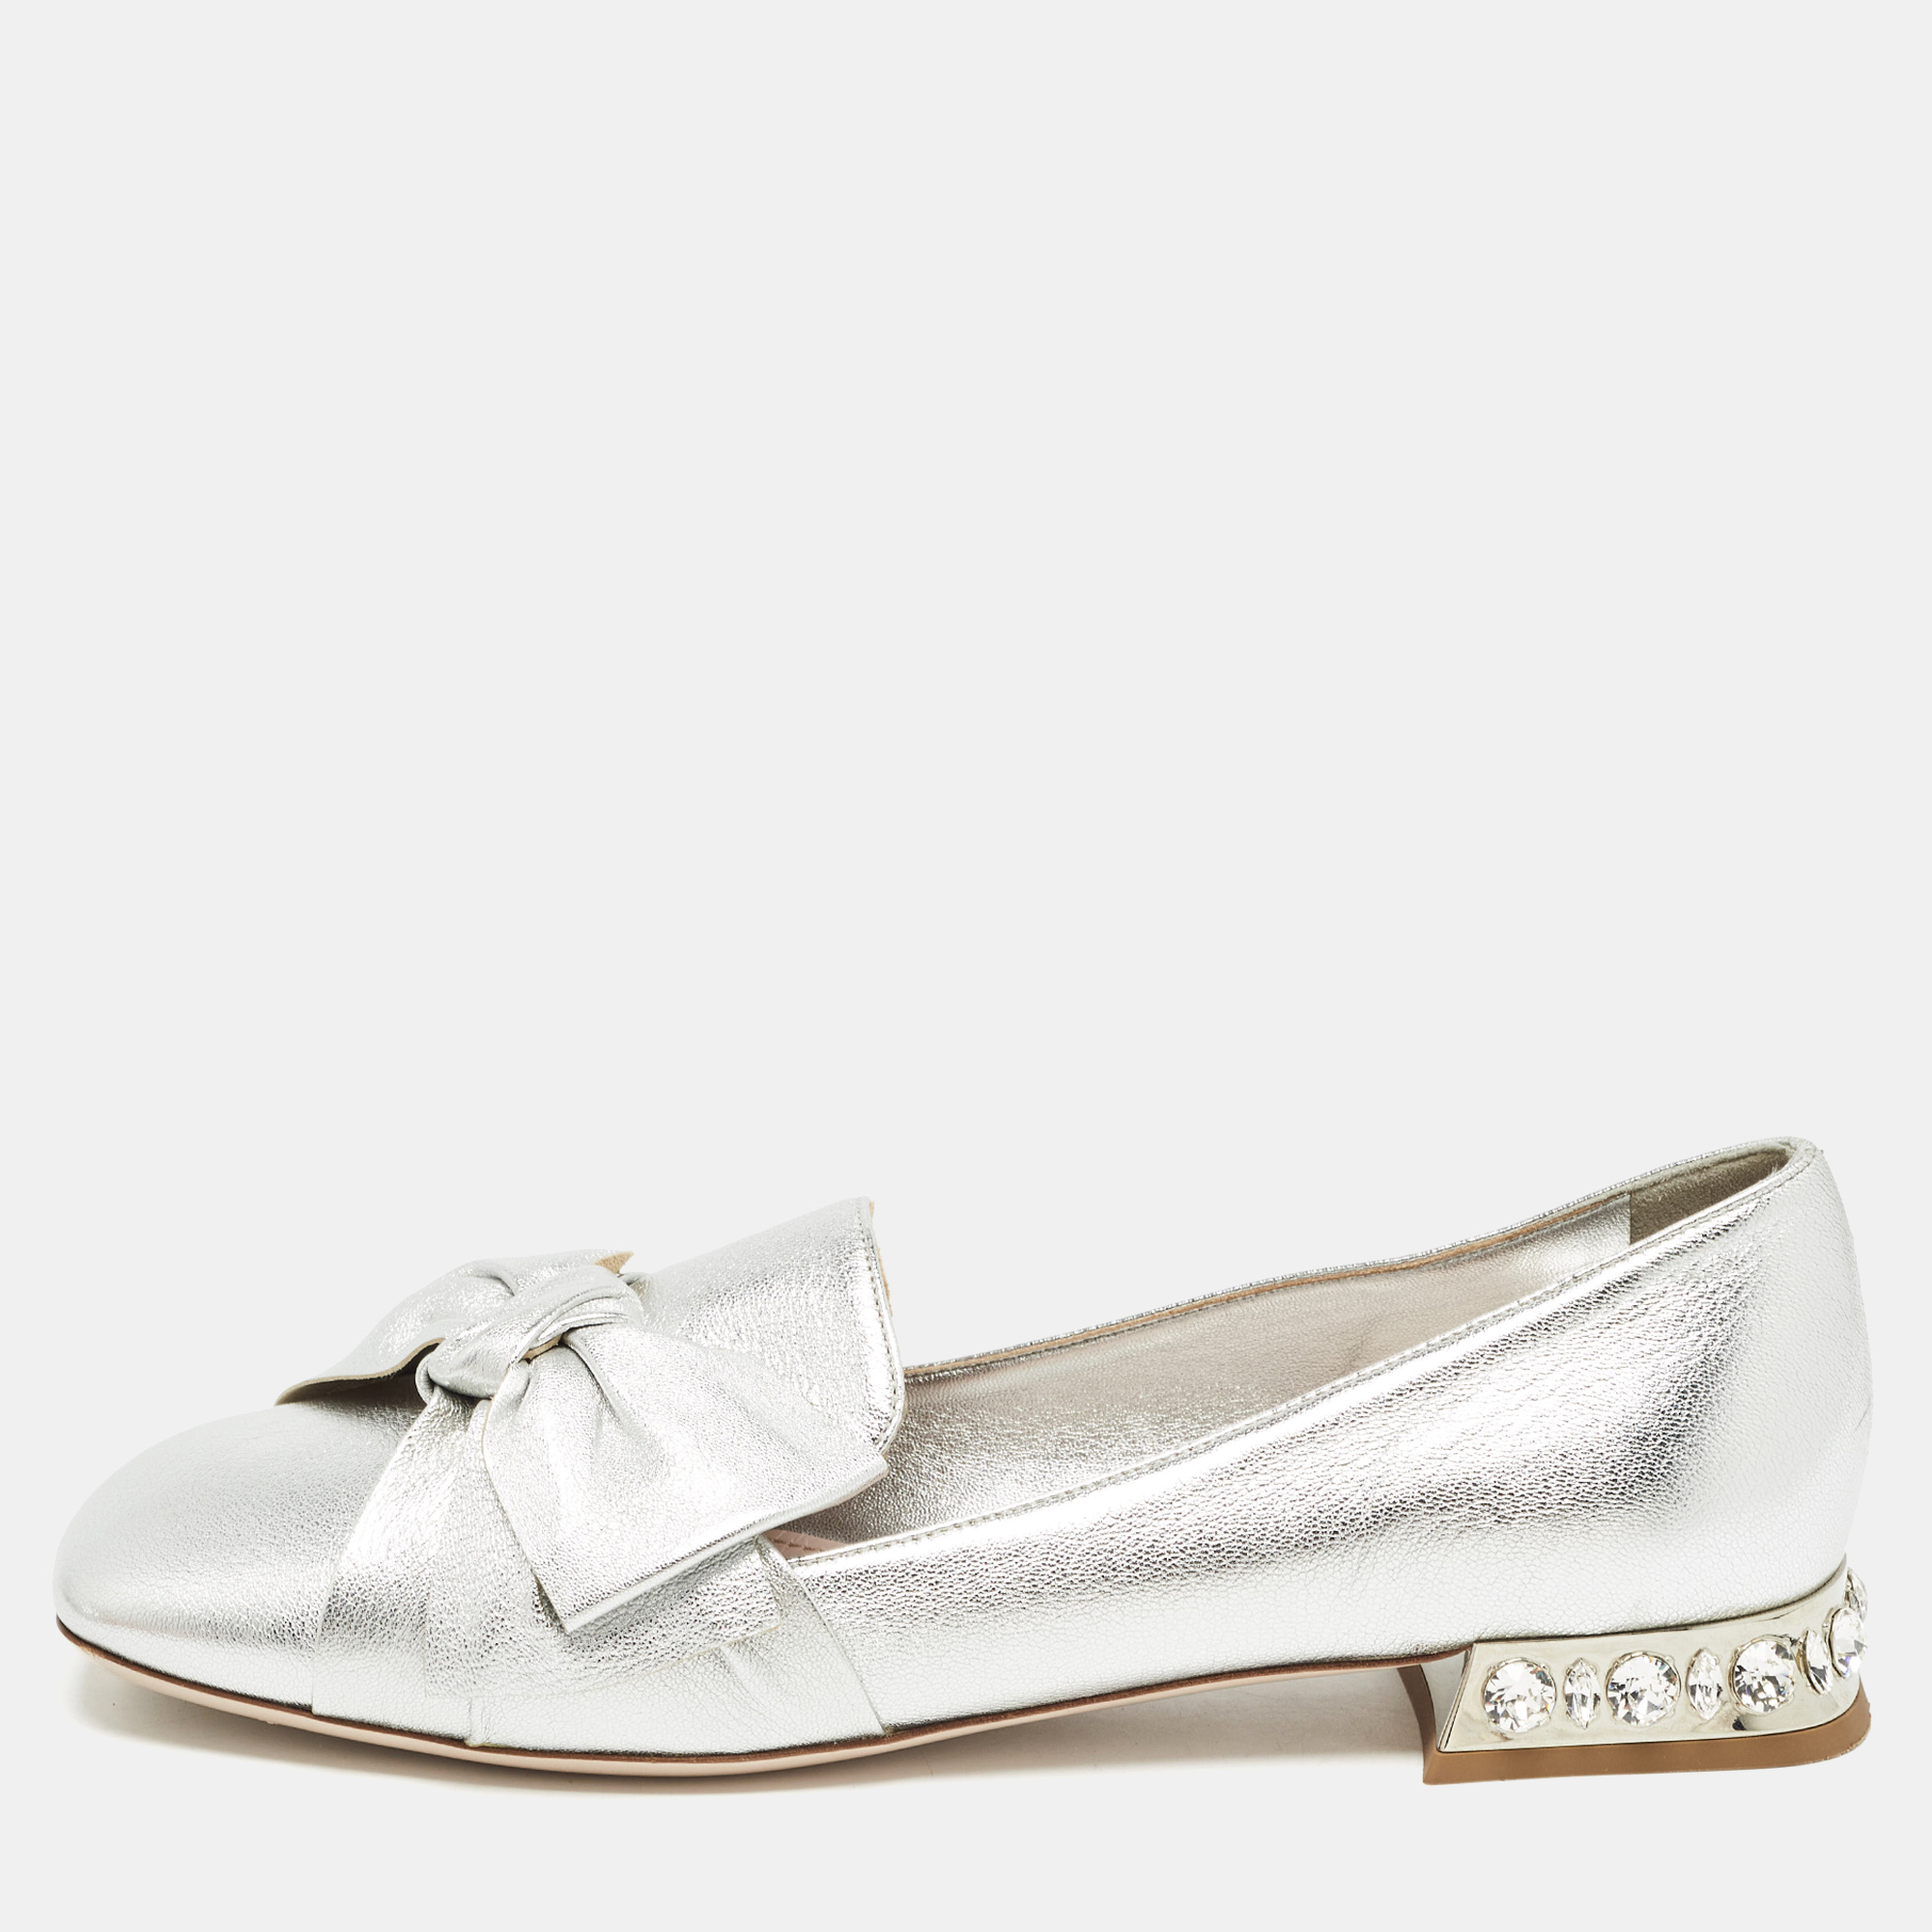 

Miu Miu Silver Leather Bow Crystal Embellished Loafers Size